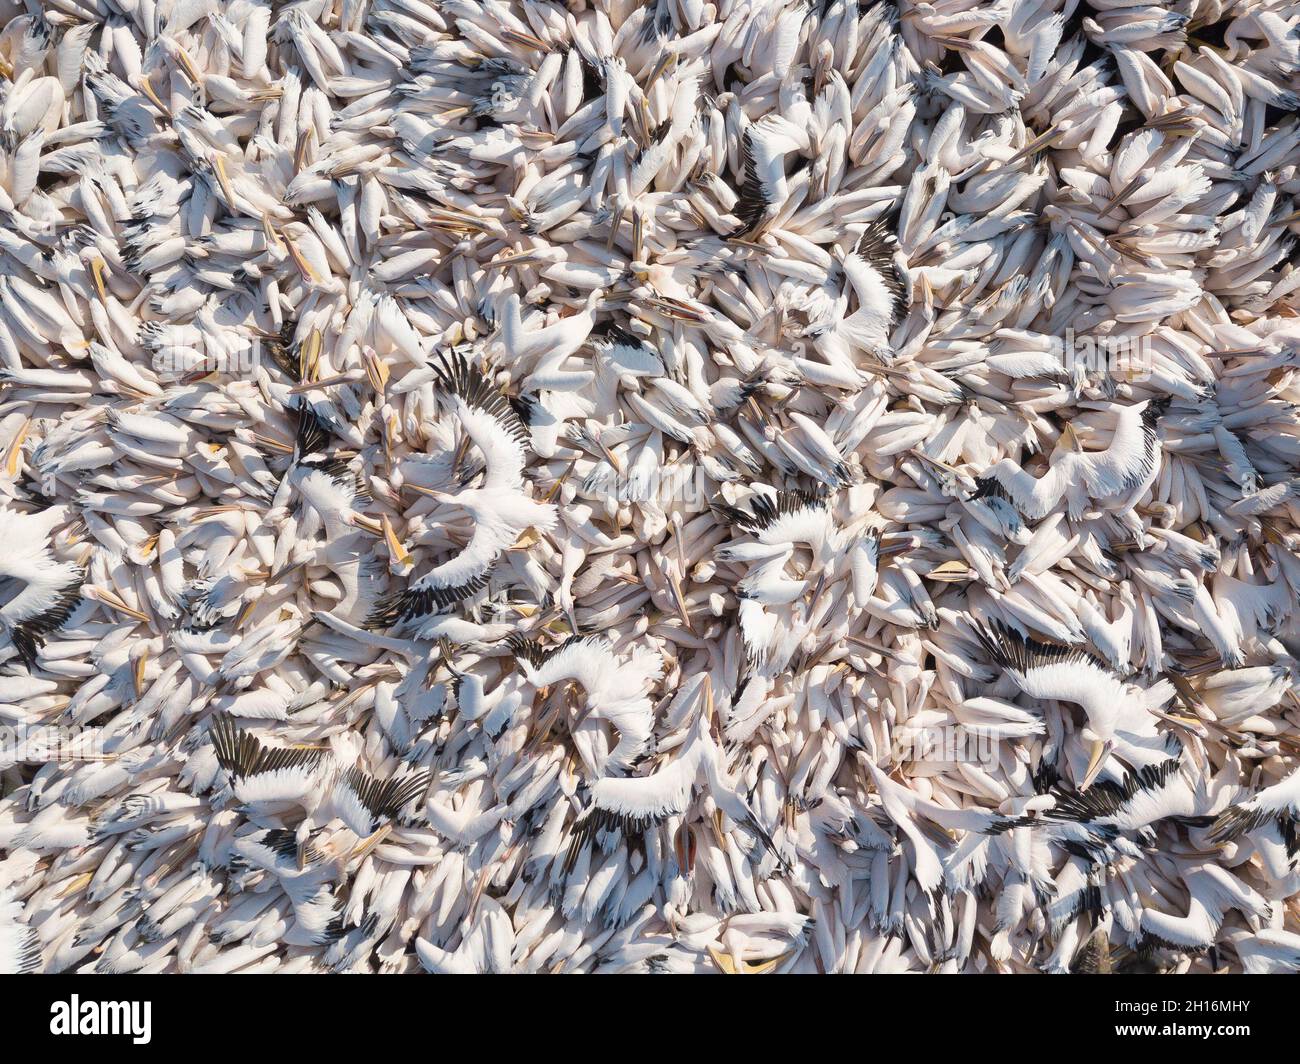 Feeding of a large group of pelicans . Pelicans in water. Stock Photo